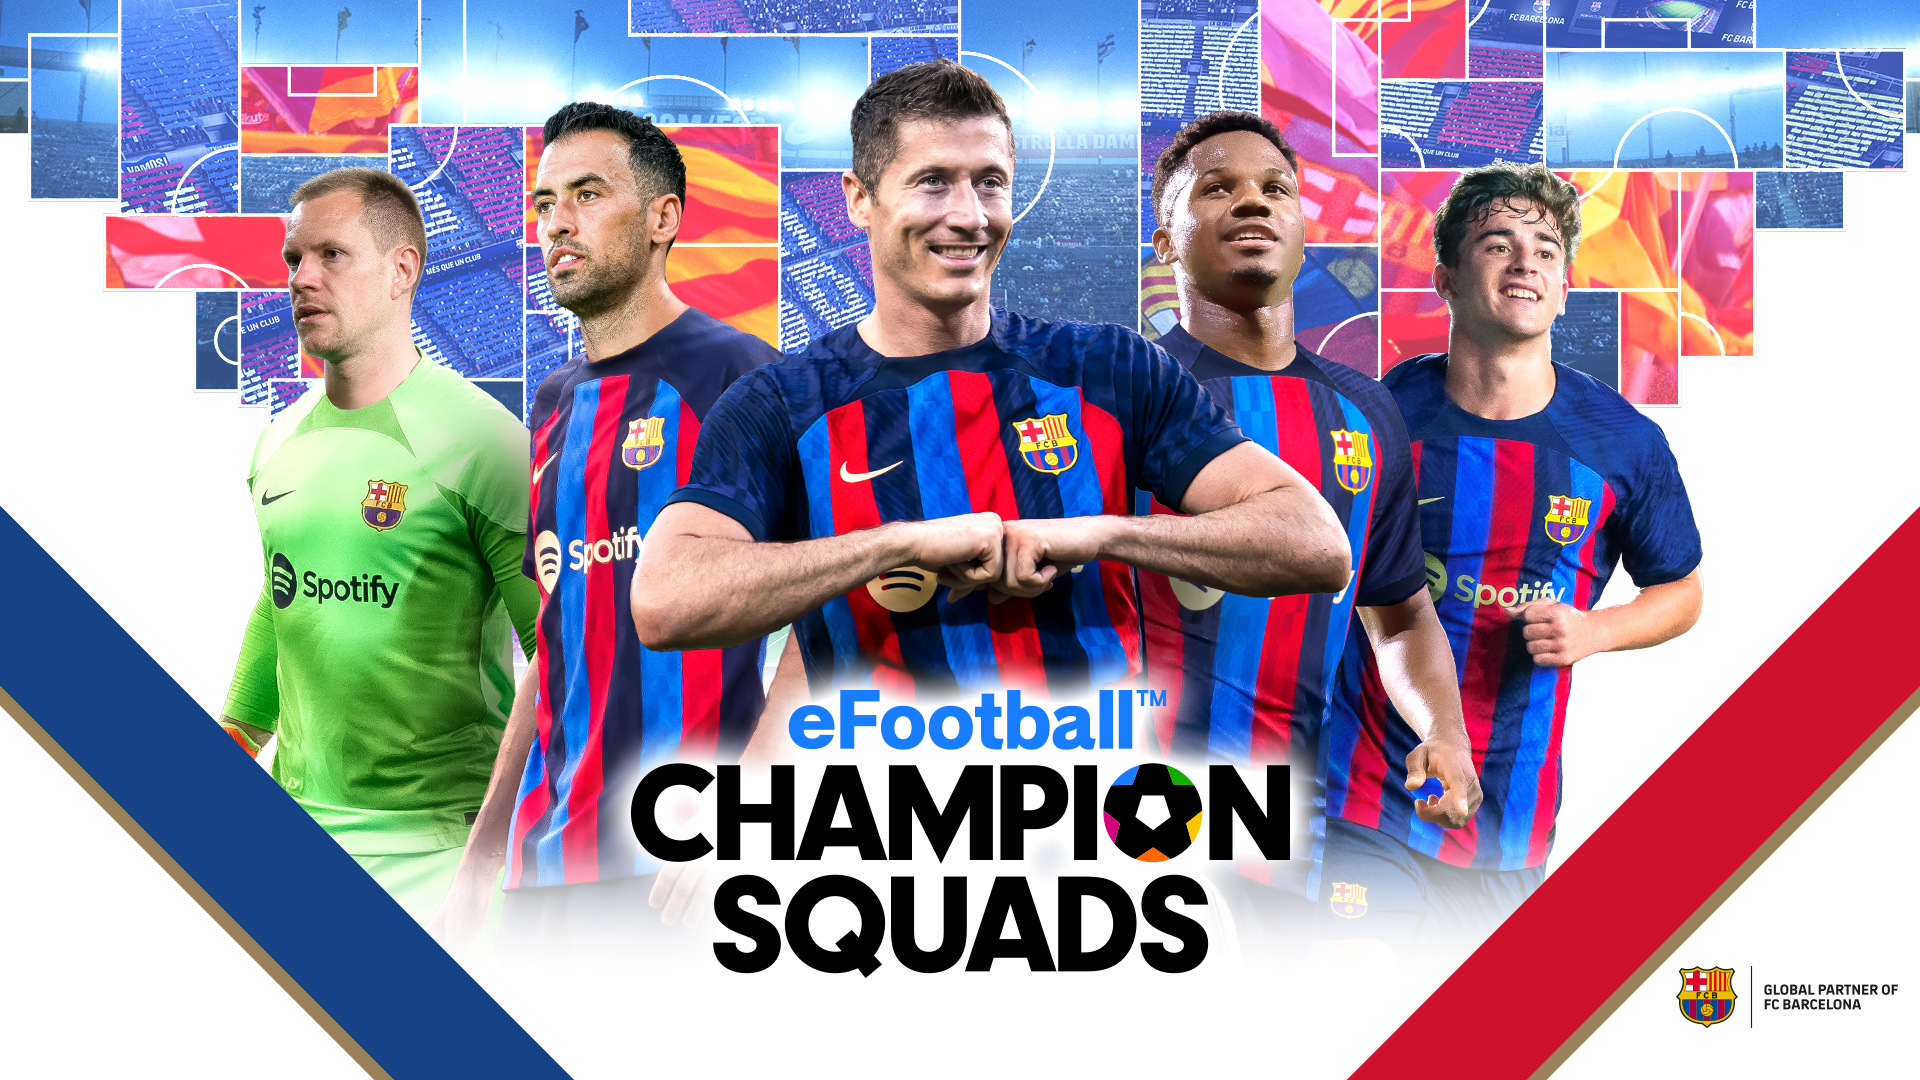 Play eFootball™  CHAMPION SQUADS Online